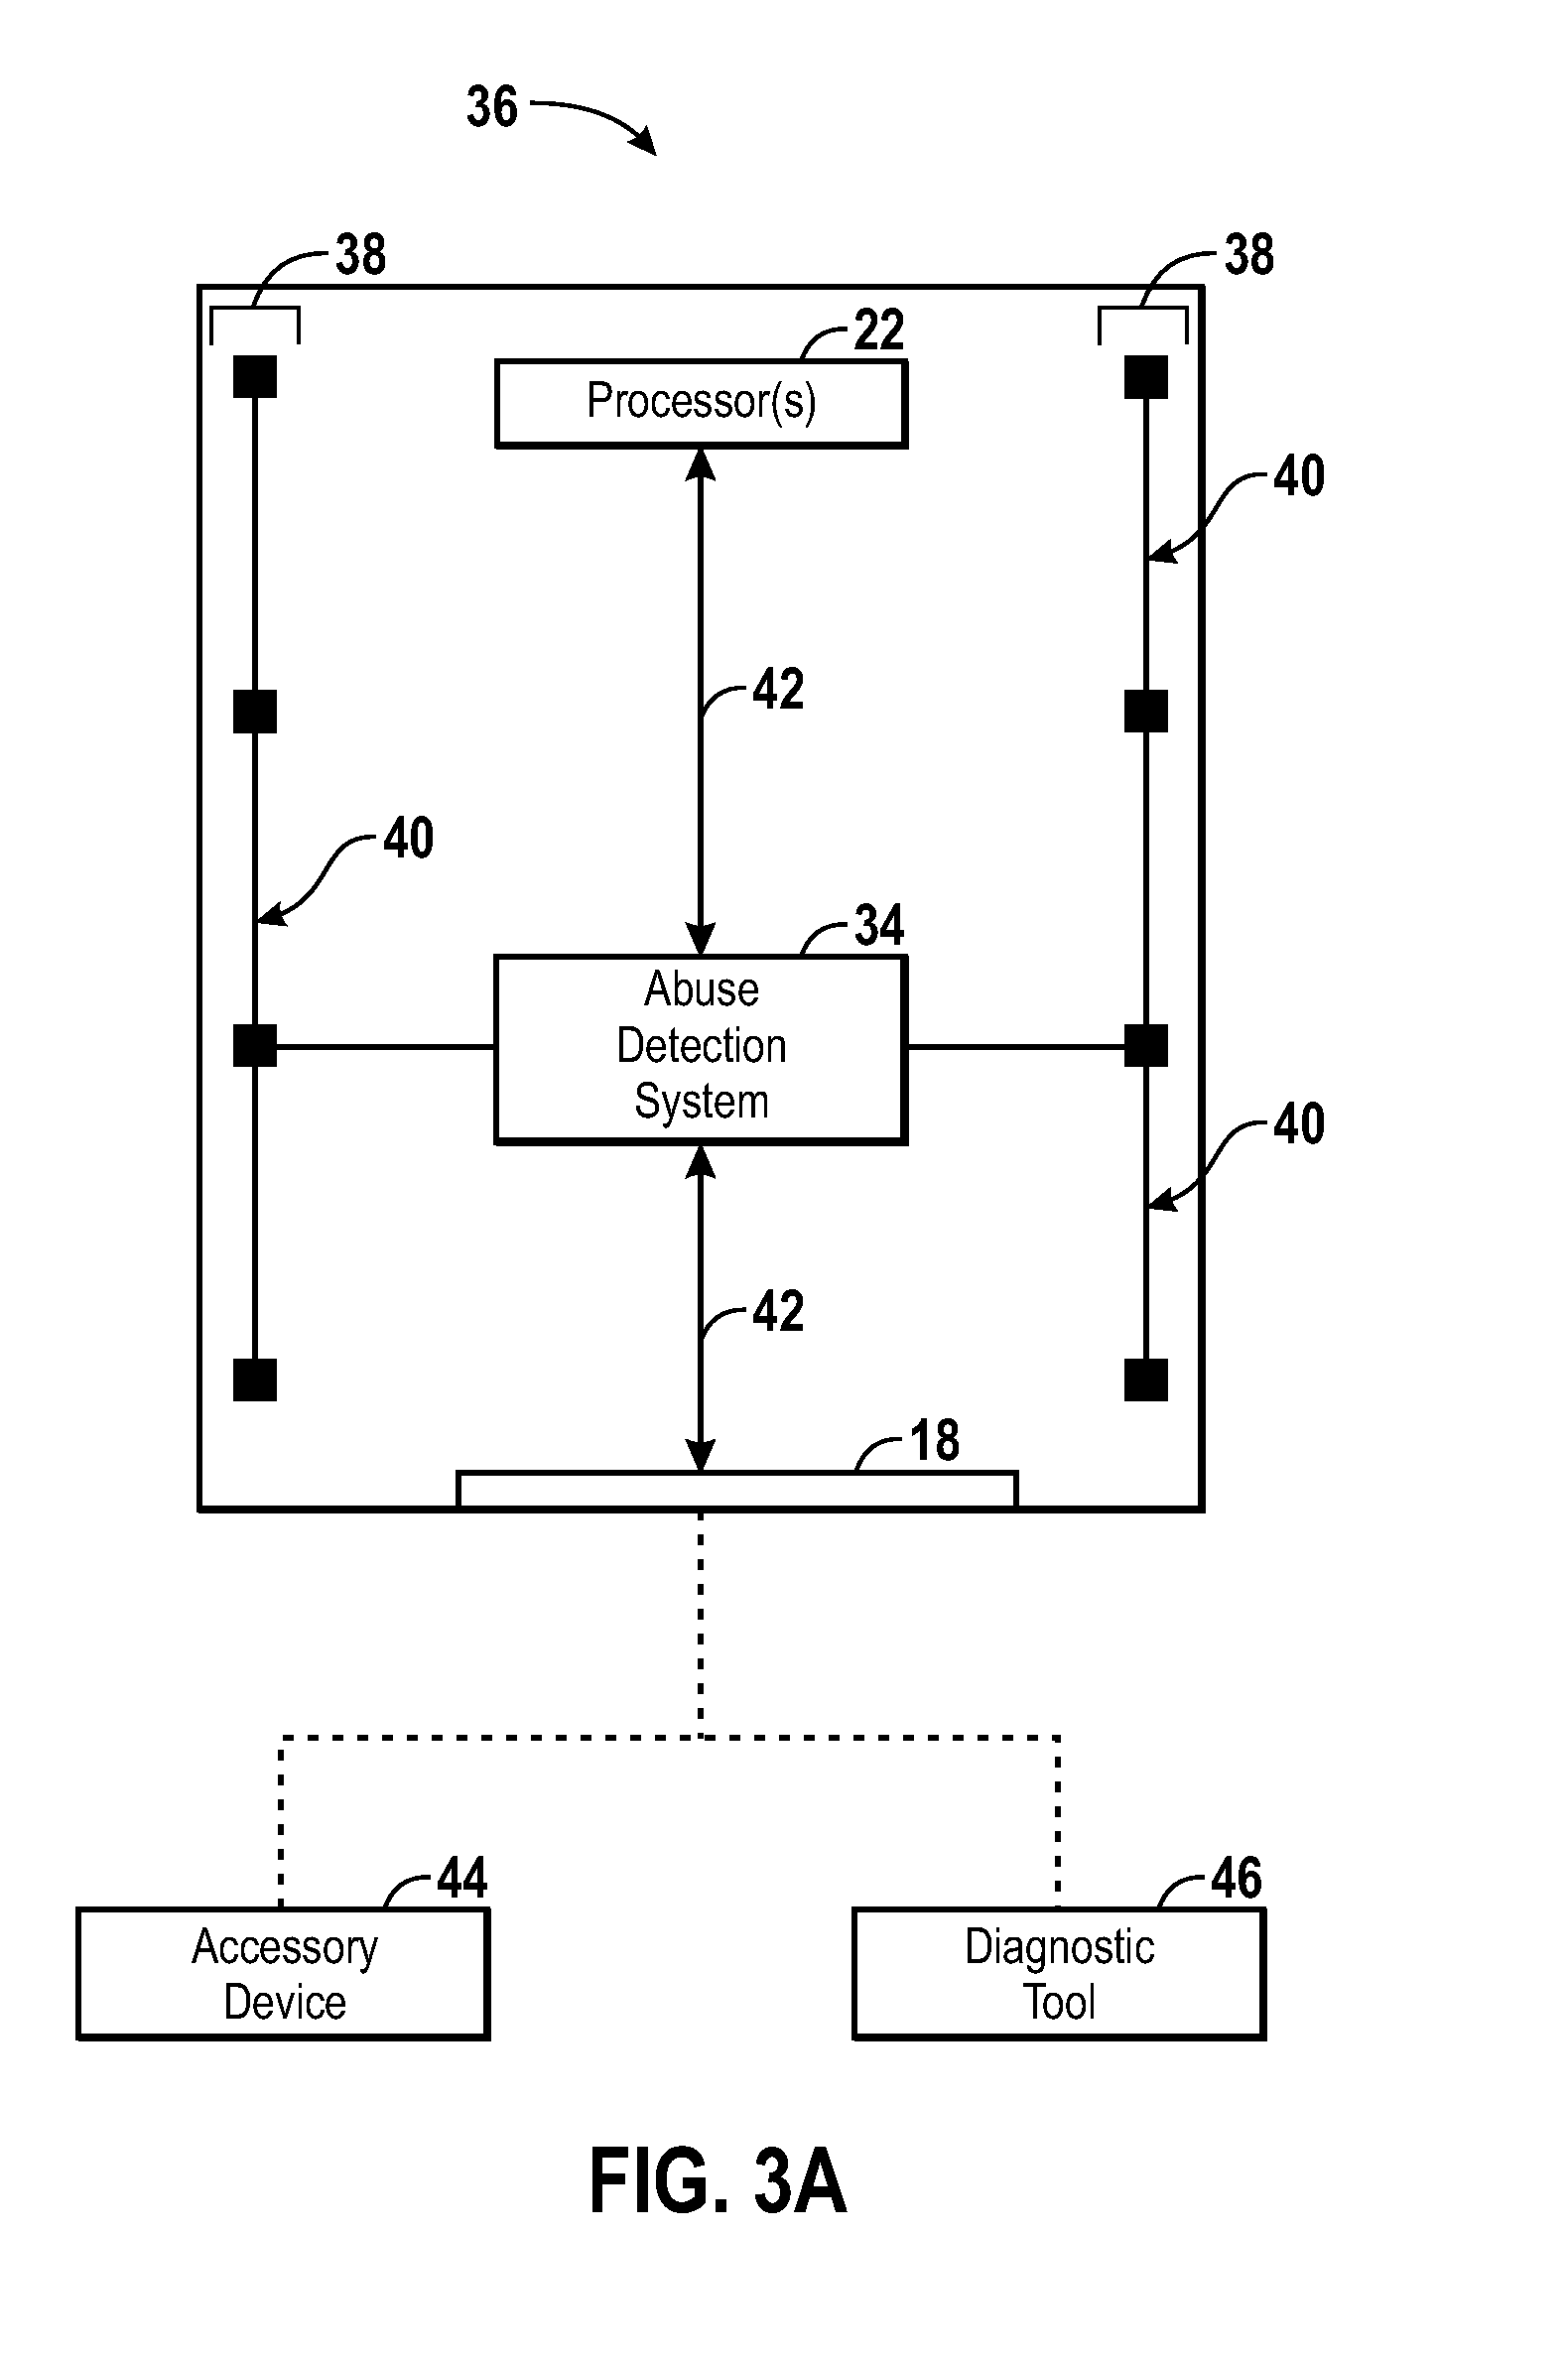 Consumer abuse detection system and method